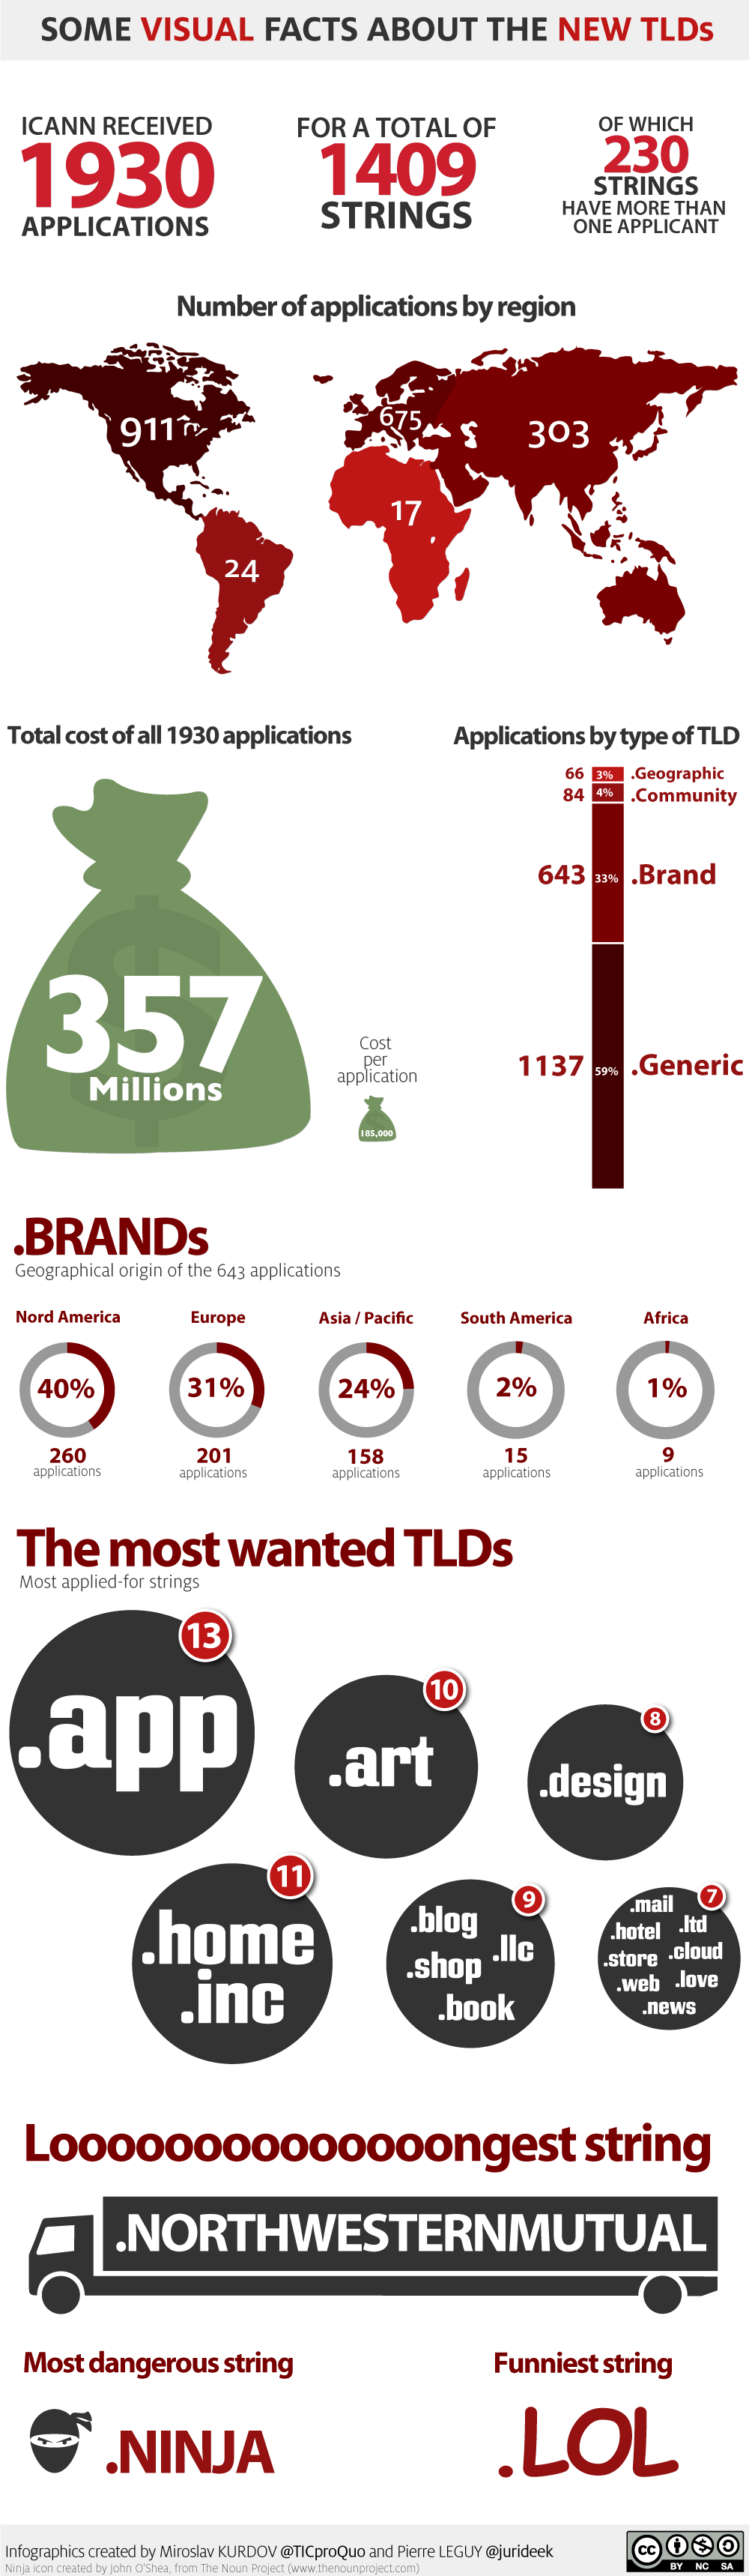 Infographics : some visual facts about the new TLDs